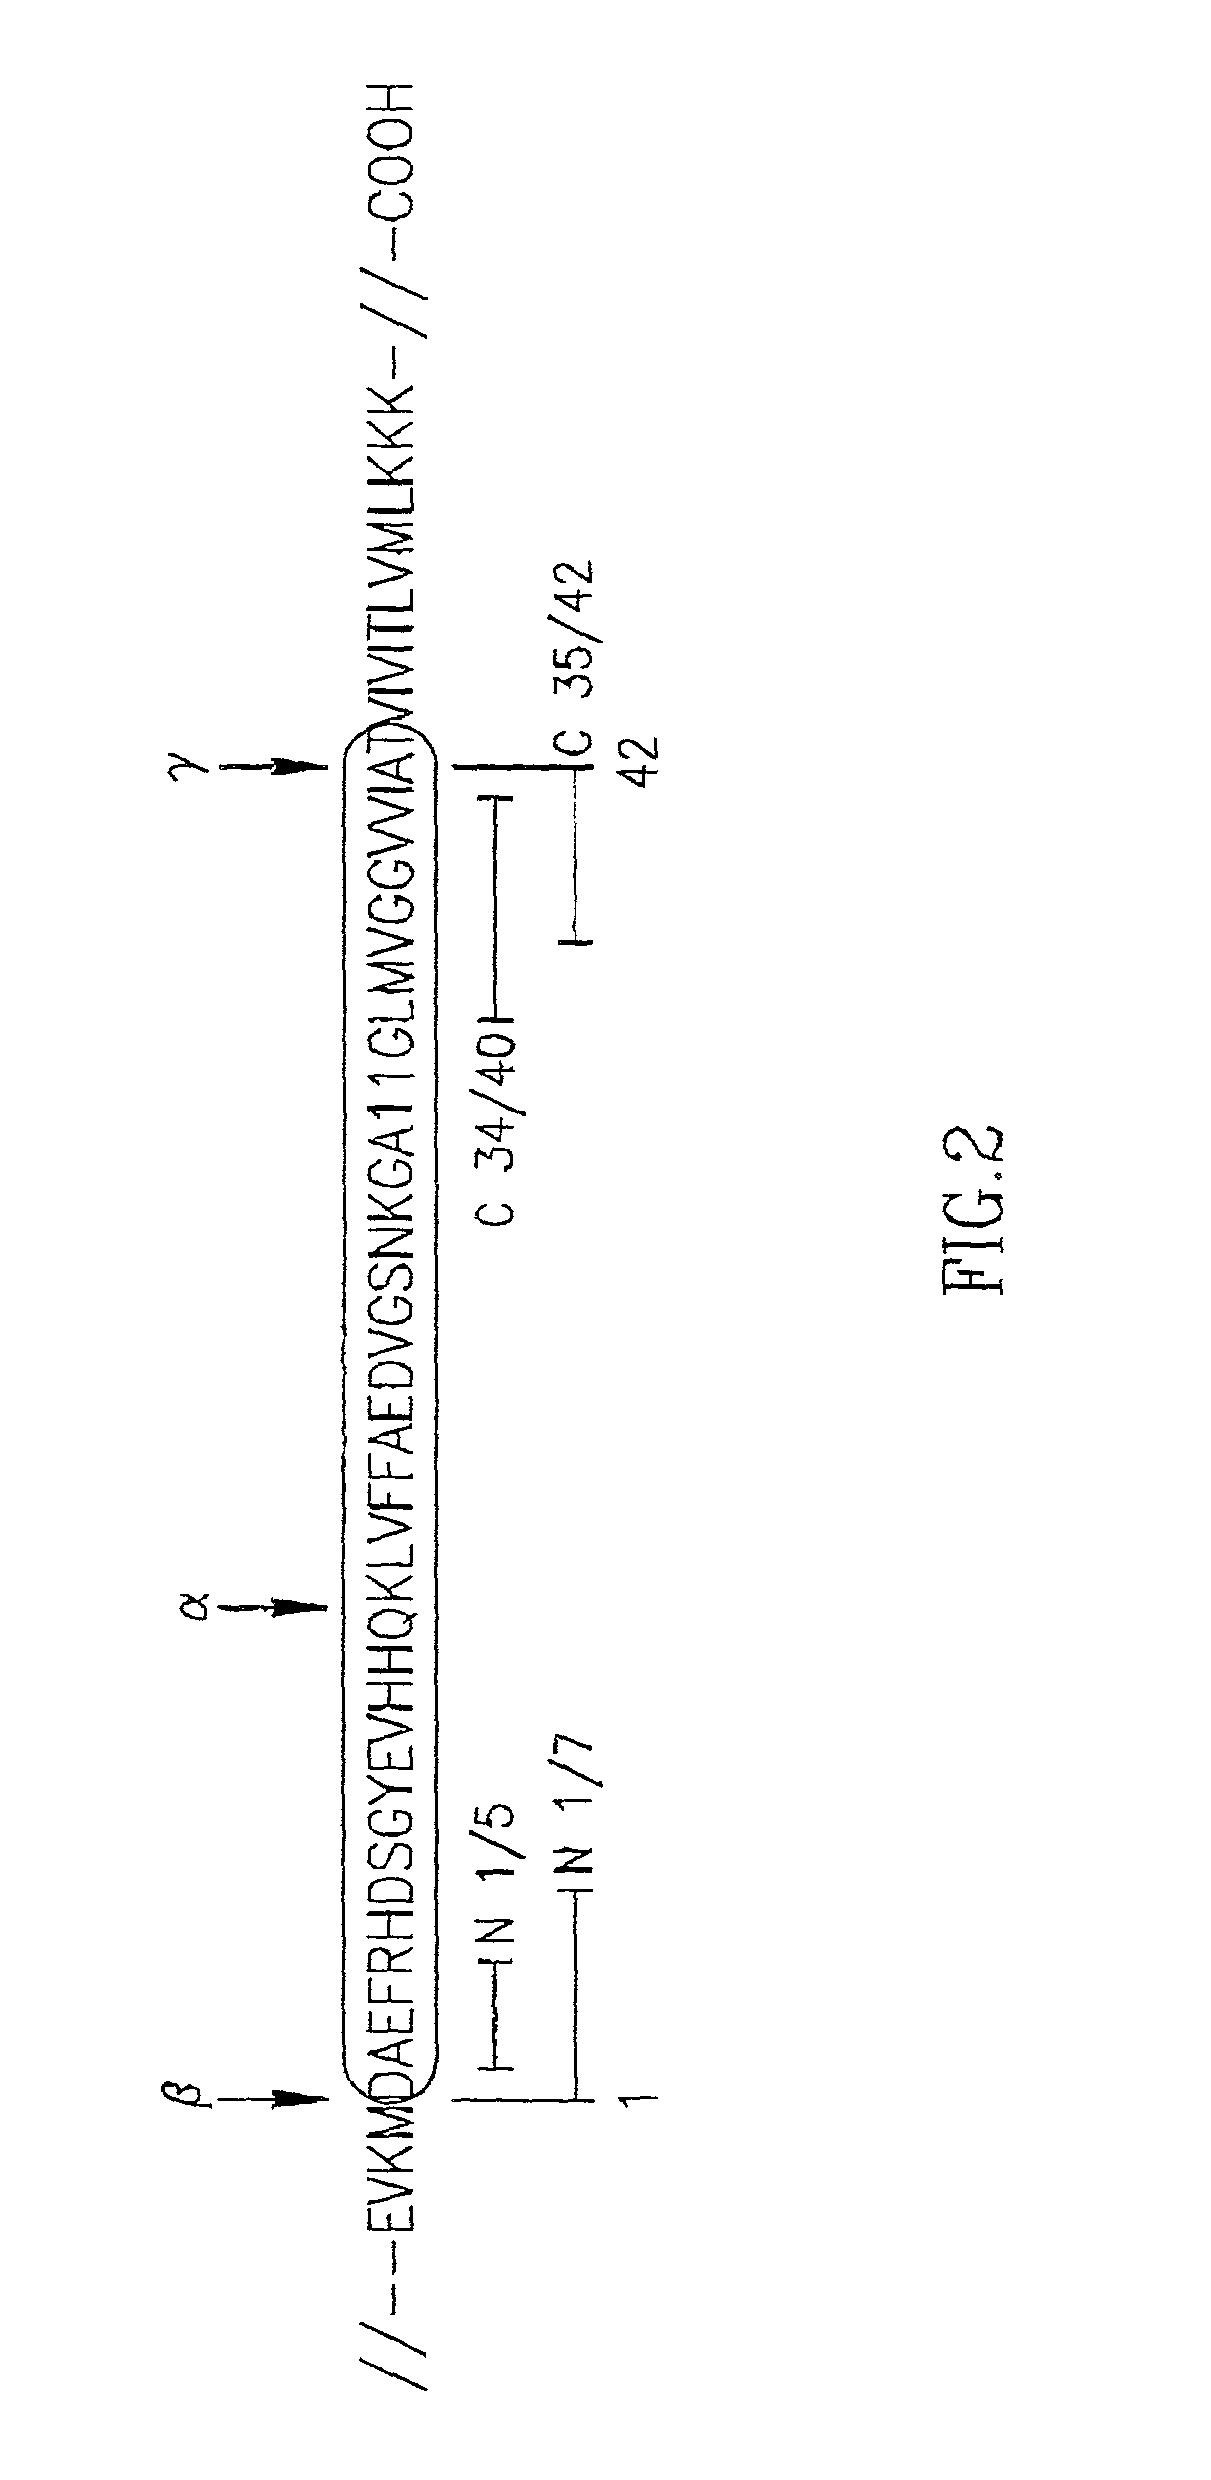 Specific antibodies to amyloid beta peptide, pharmaceutical compositions and methods of use thereof